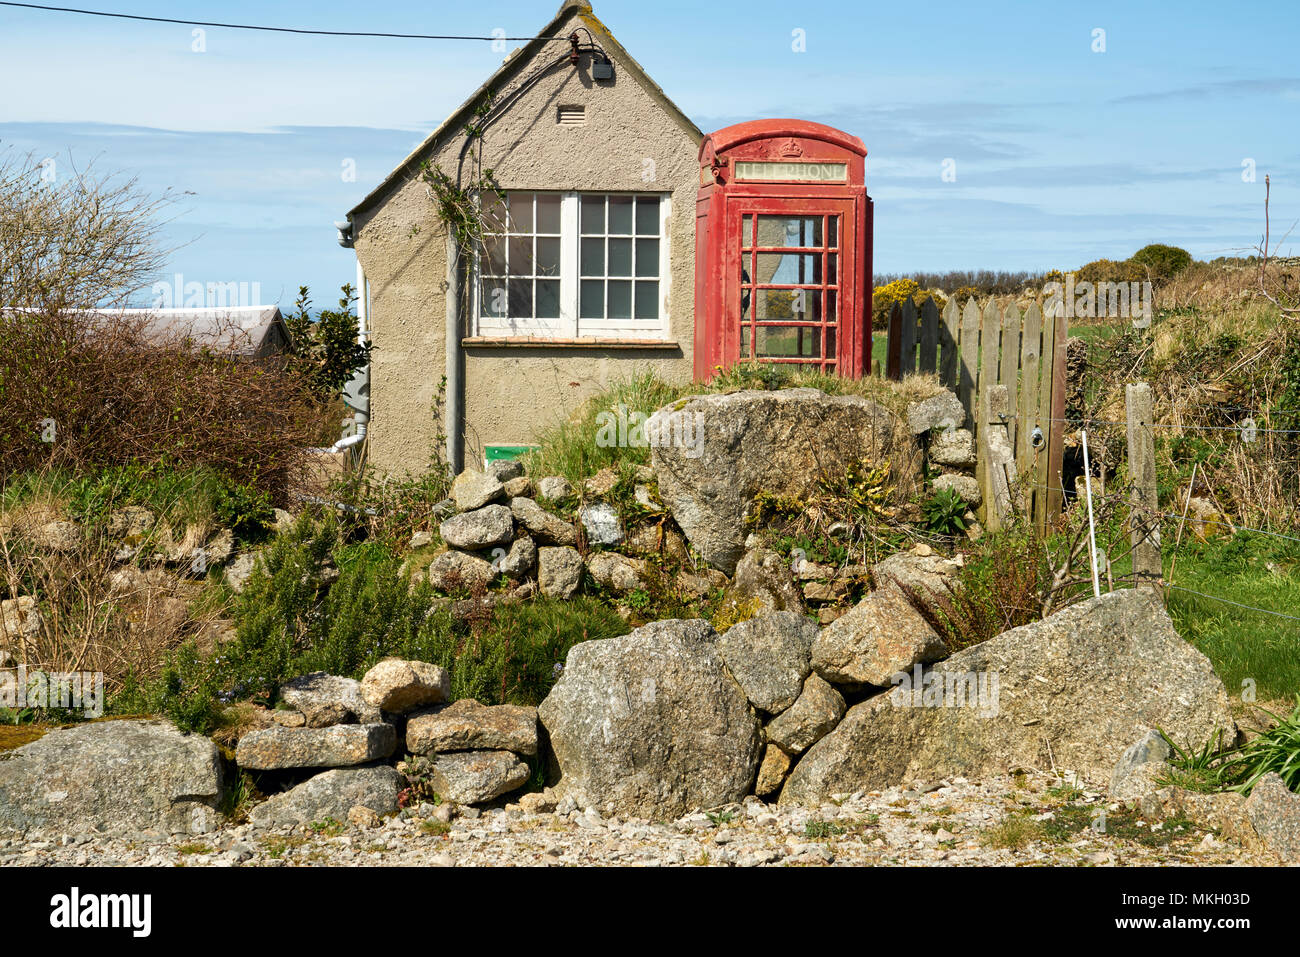 The old telephone exchange in Zennor near St Ives, Cornwall UK. 7/4/2018. Now decommissioned. Used to connect this rural community to the outside world Stock Photo